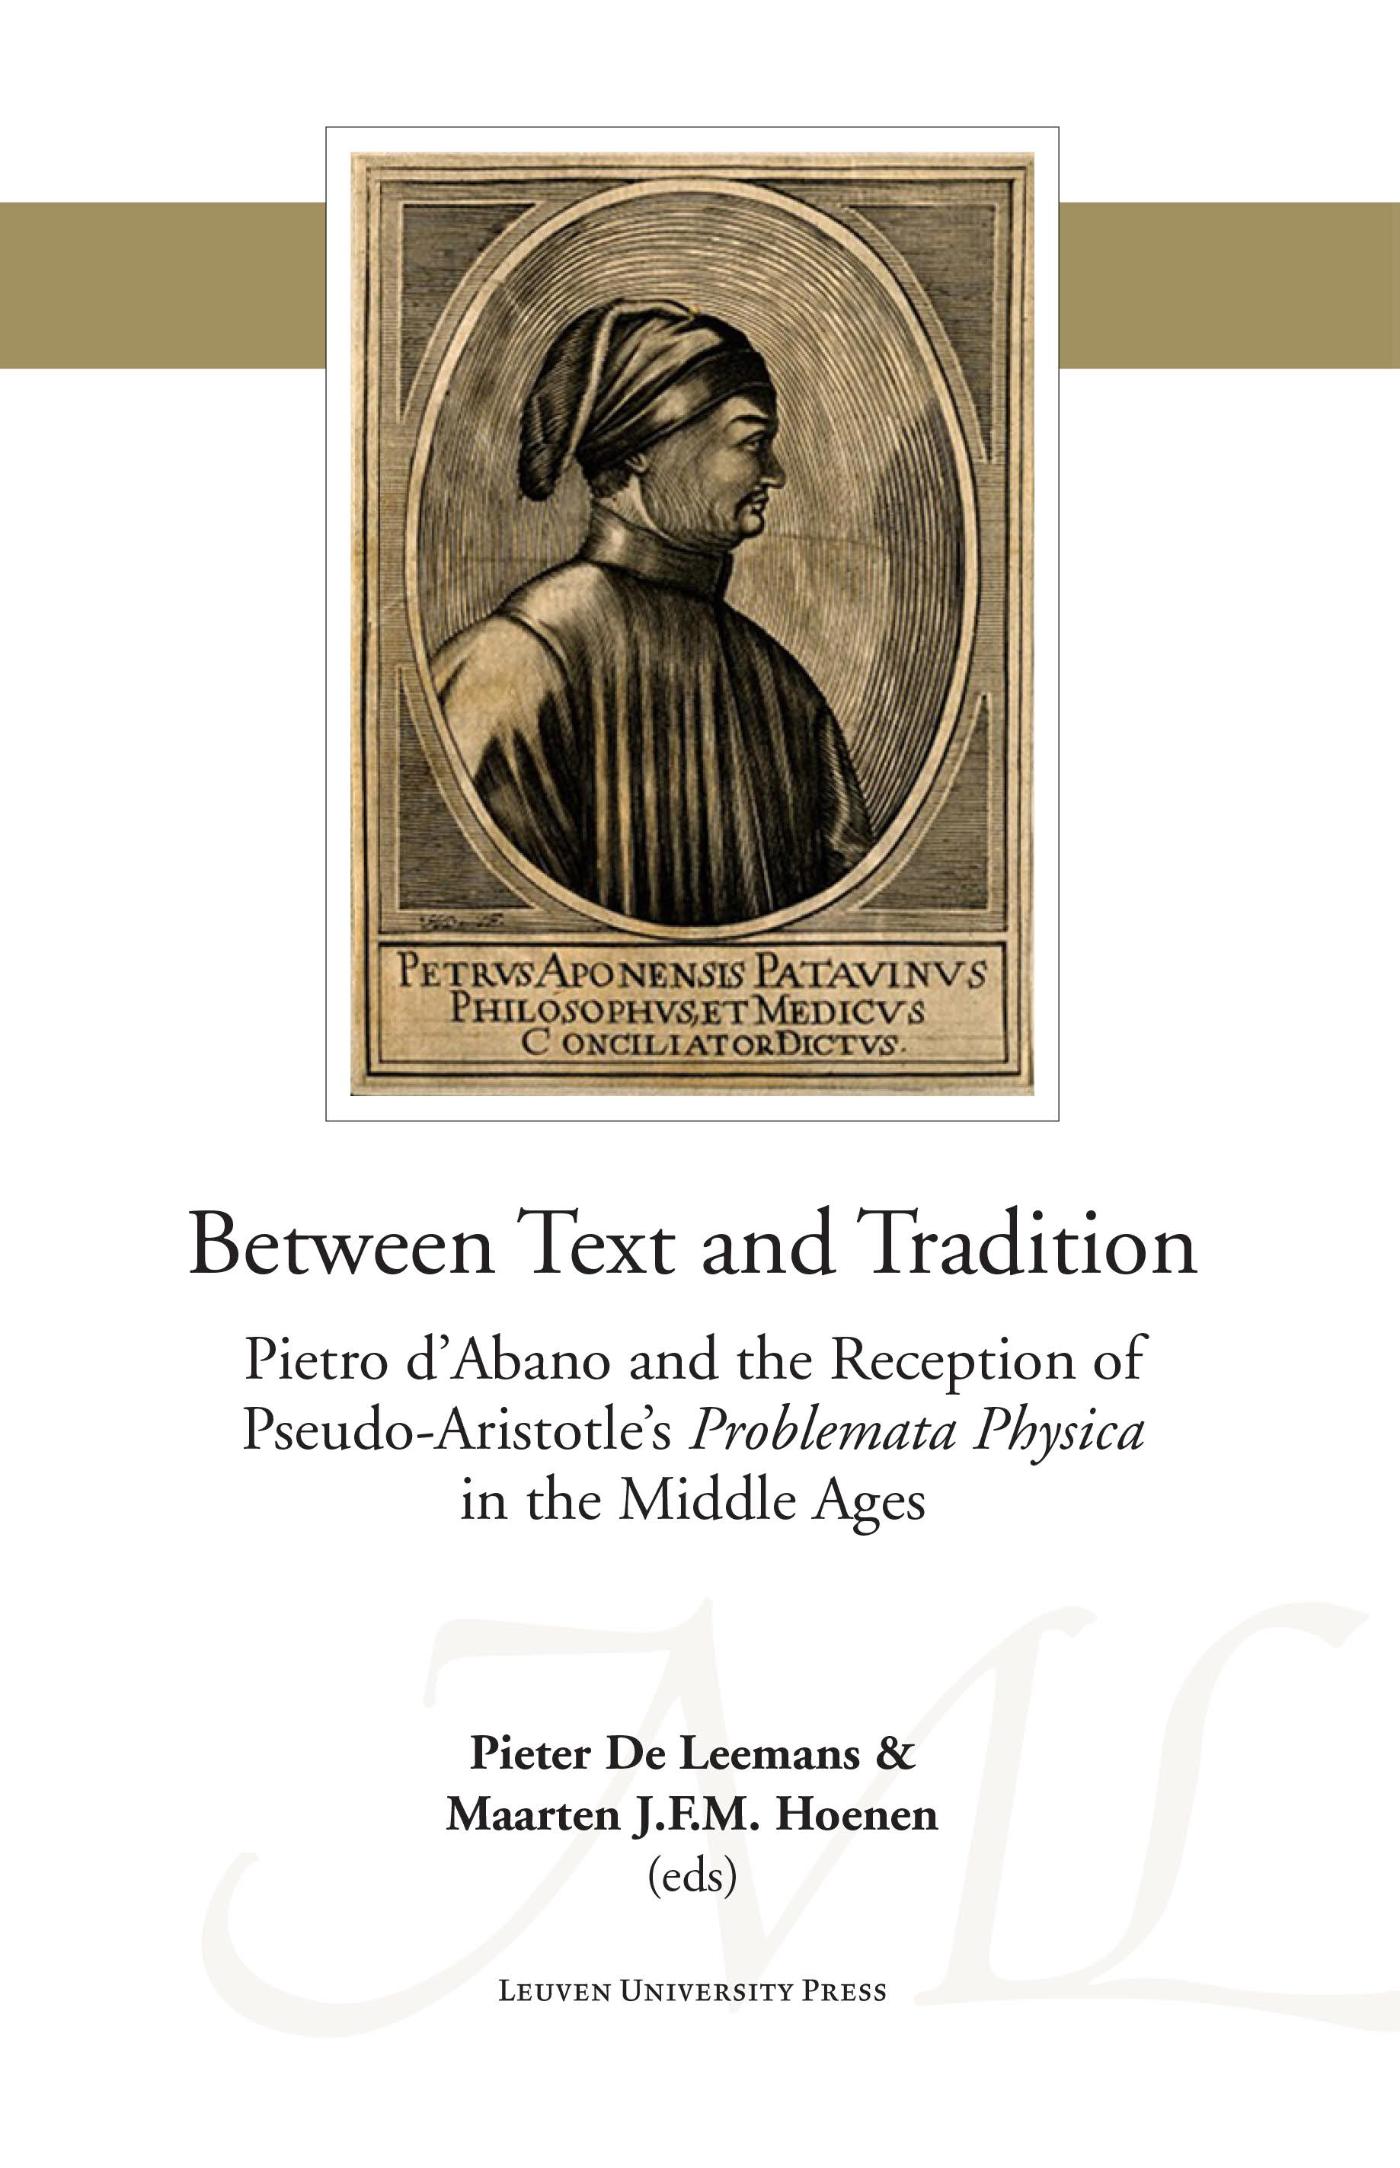 Between text and tradition (Ebook)